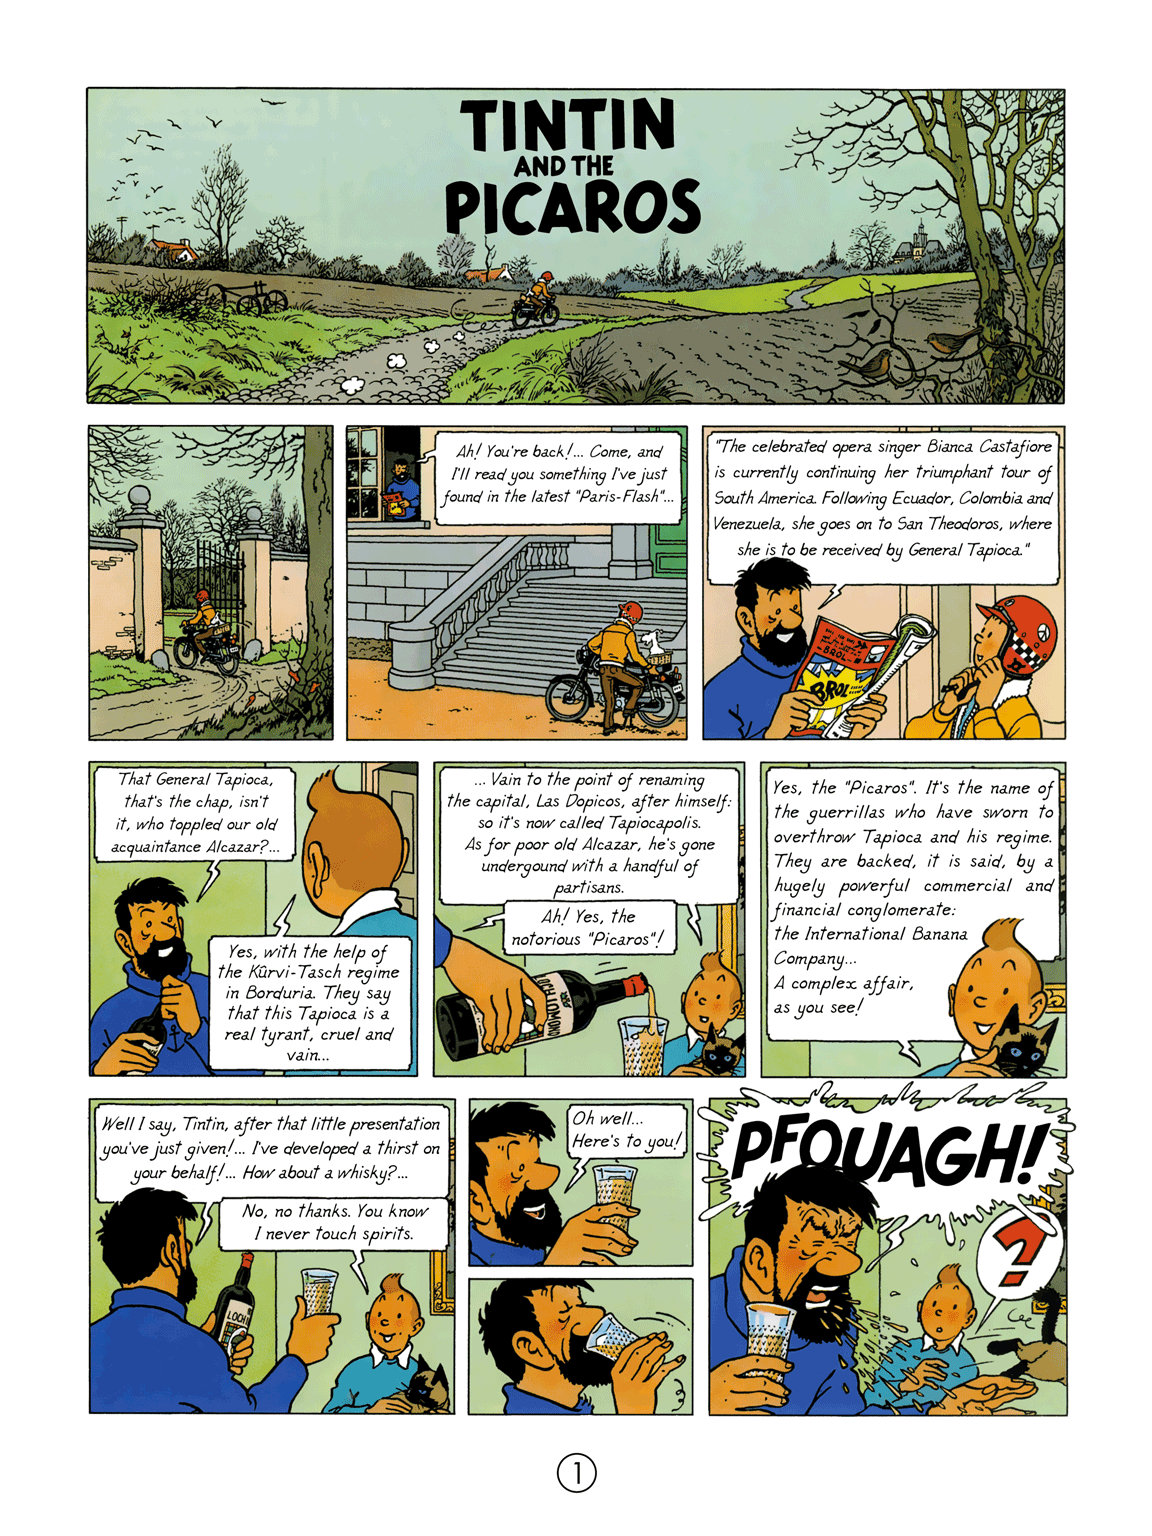 Tintin and the Picaros (The Adventures of Tintin) by Hergé